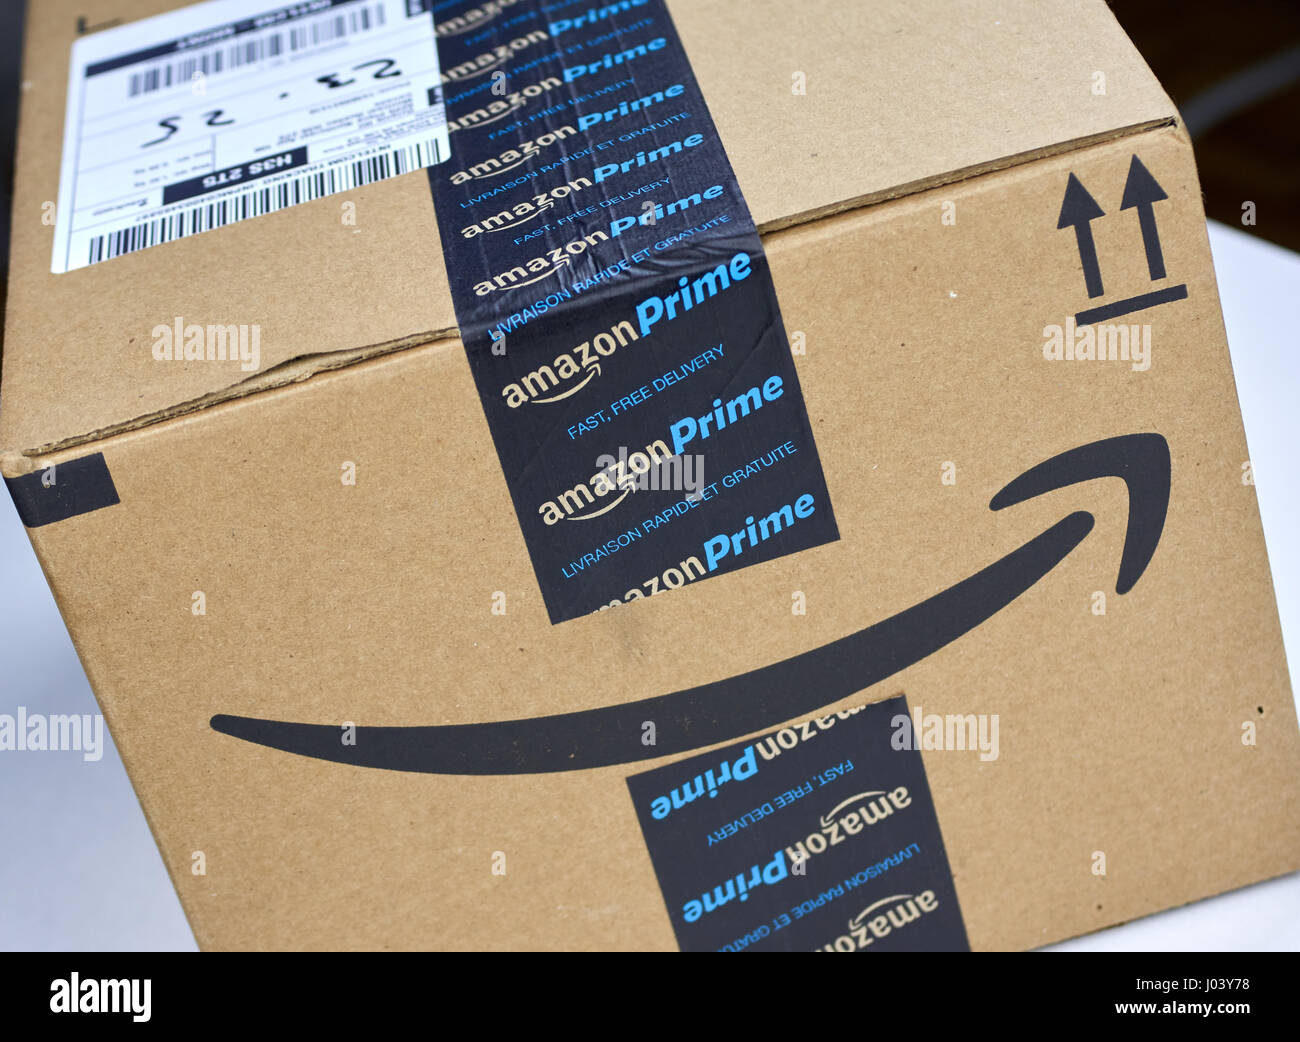 MONTREAL, CANADA - MARCH 28, 2017: Amazon Prime shipping box with branded tape on it. Amazon is an American electronic commerce and cloud computing co Stock Photo